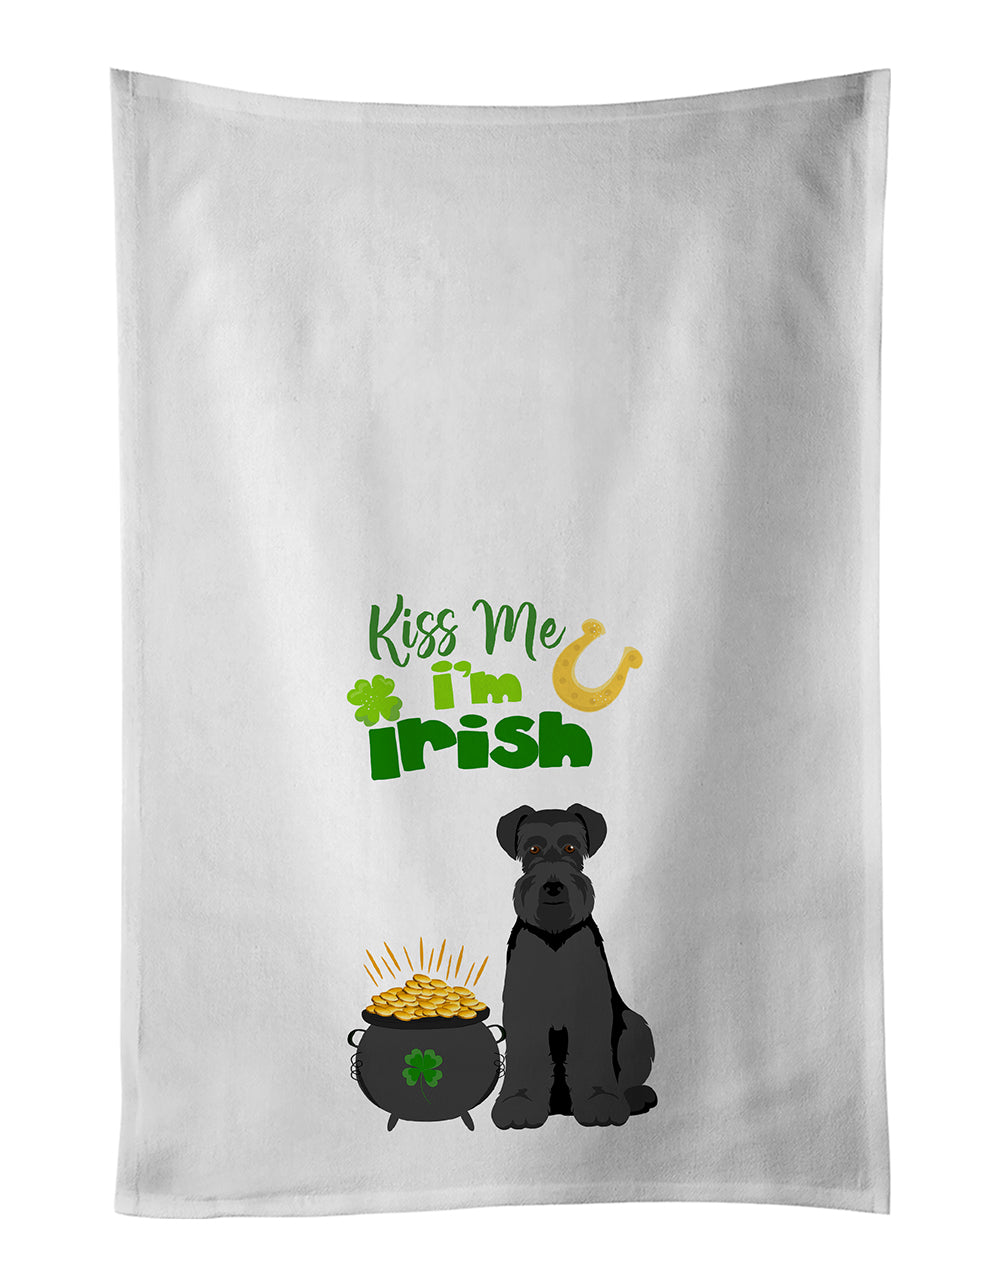 Buy this Black Natural Ears Schnauzer St. Patrick's Day White Kitchen Towel Set of 2 Dish Towels